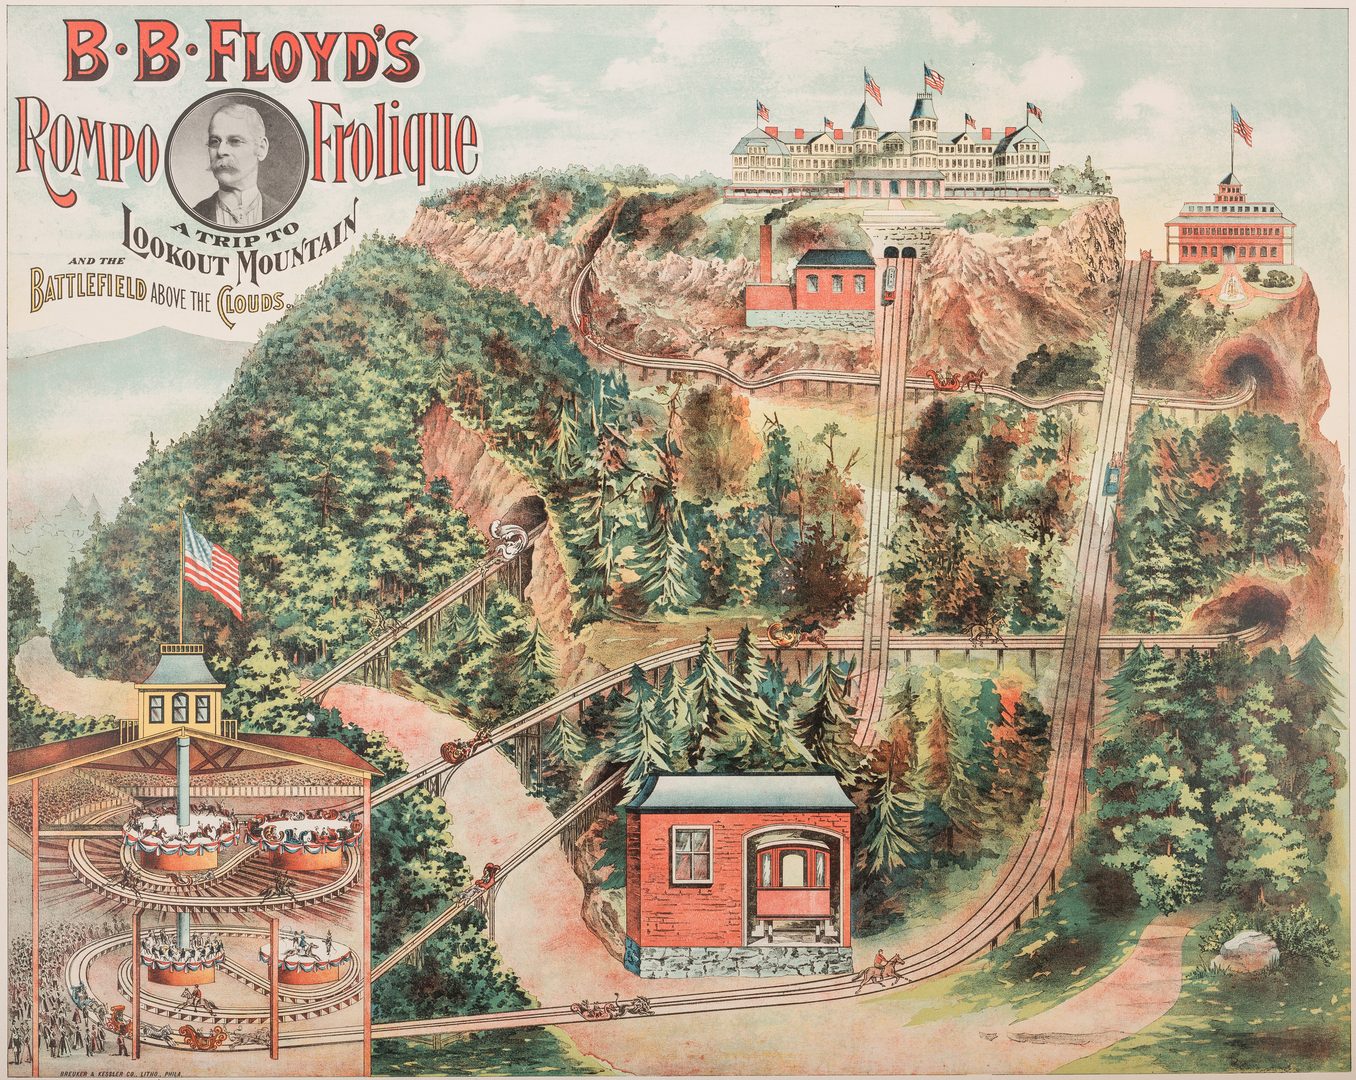 Lot 806: "Rompo Frolique Lookout Mountain" Chromolithograph Poster